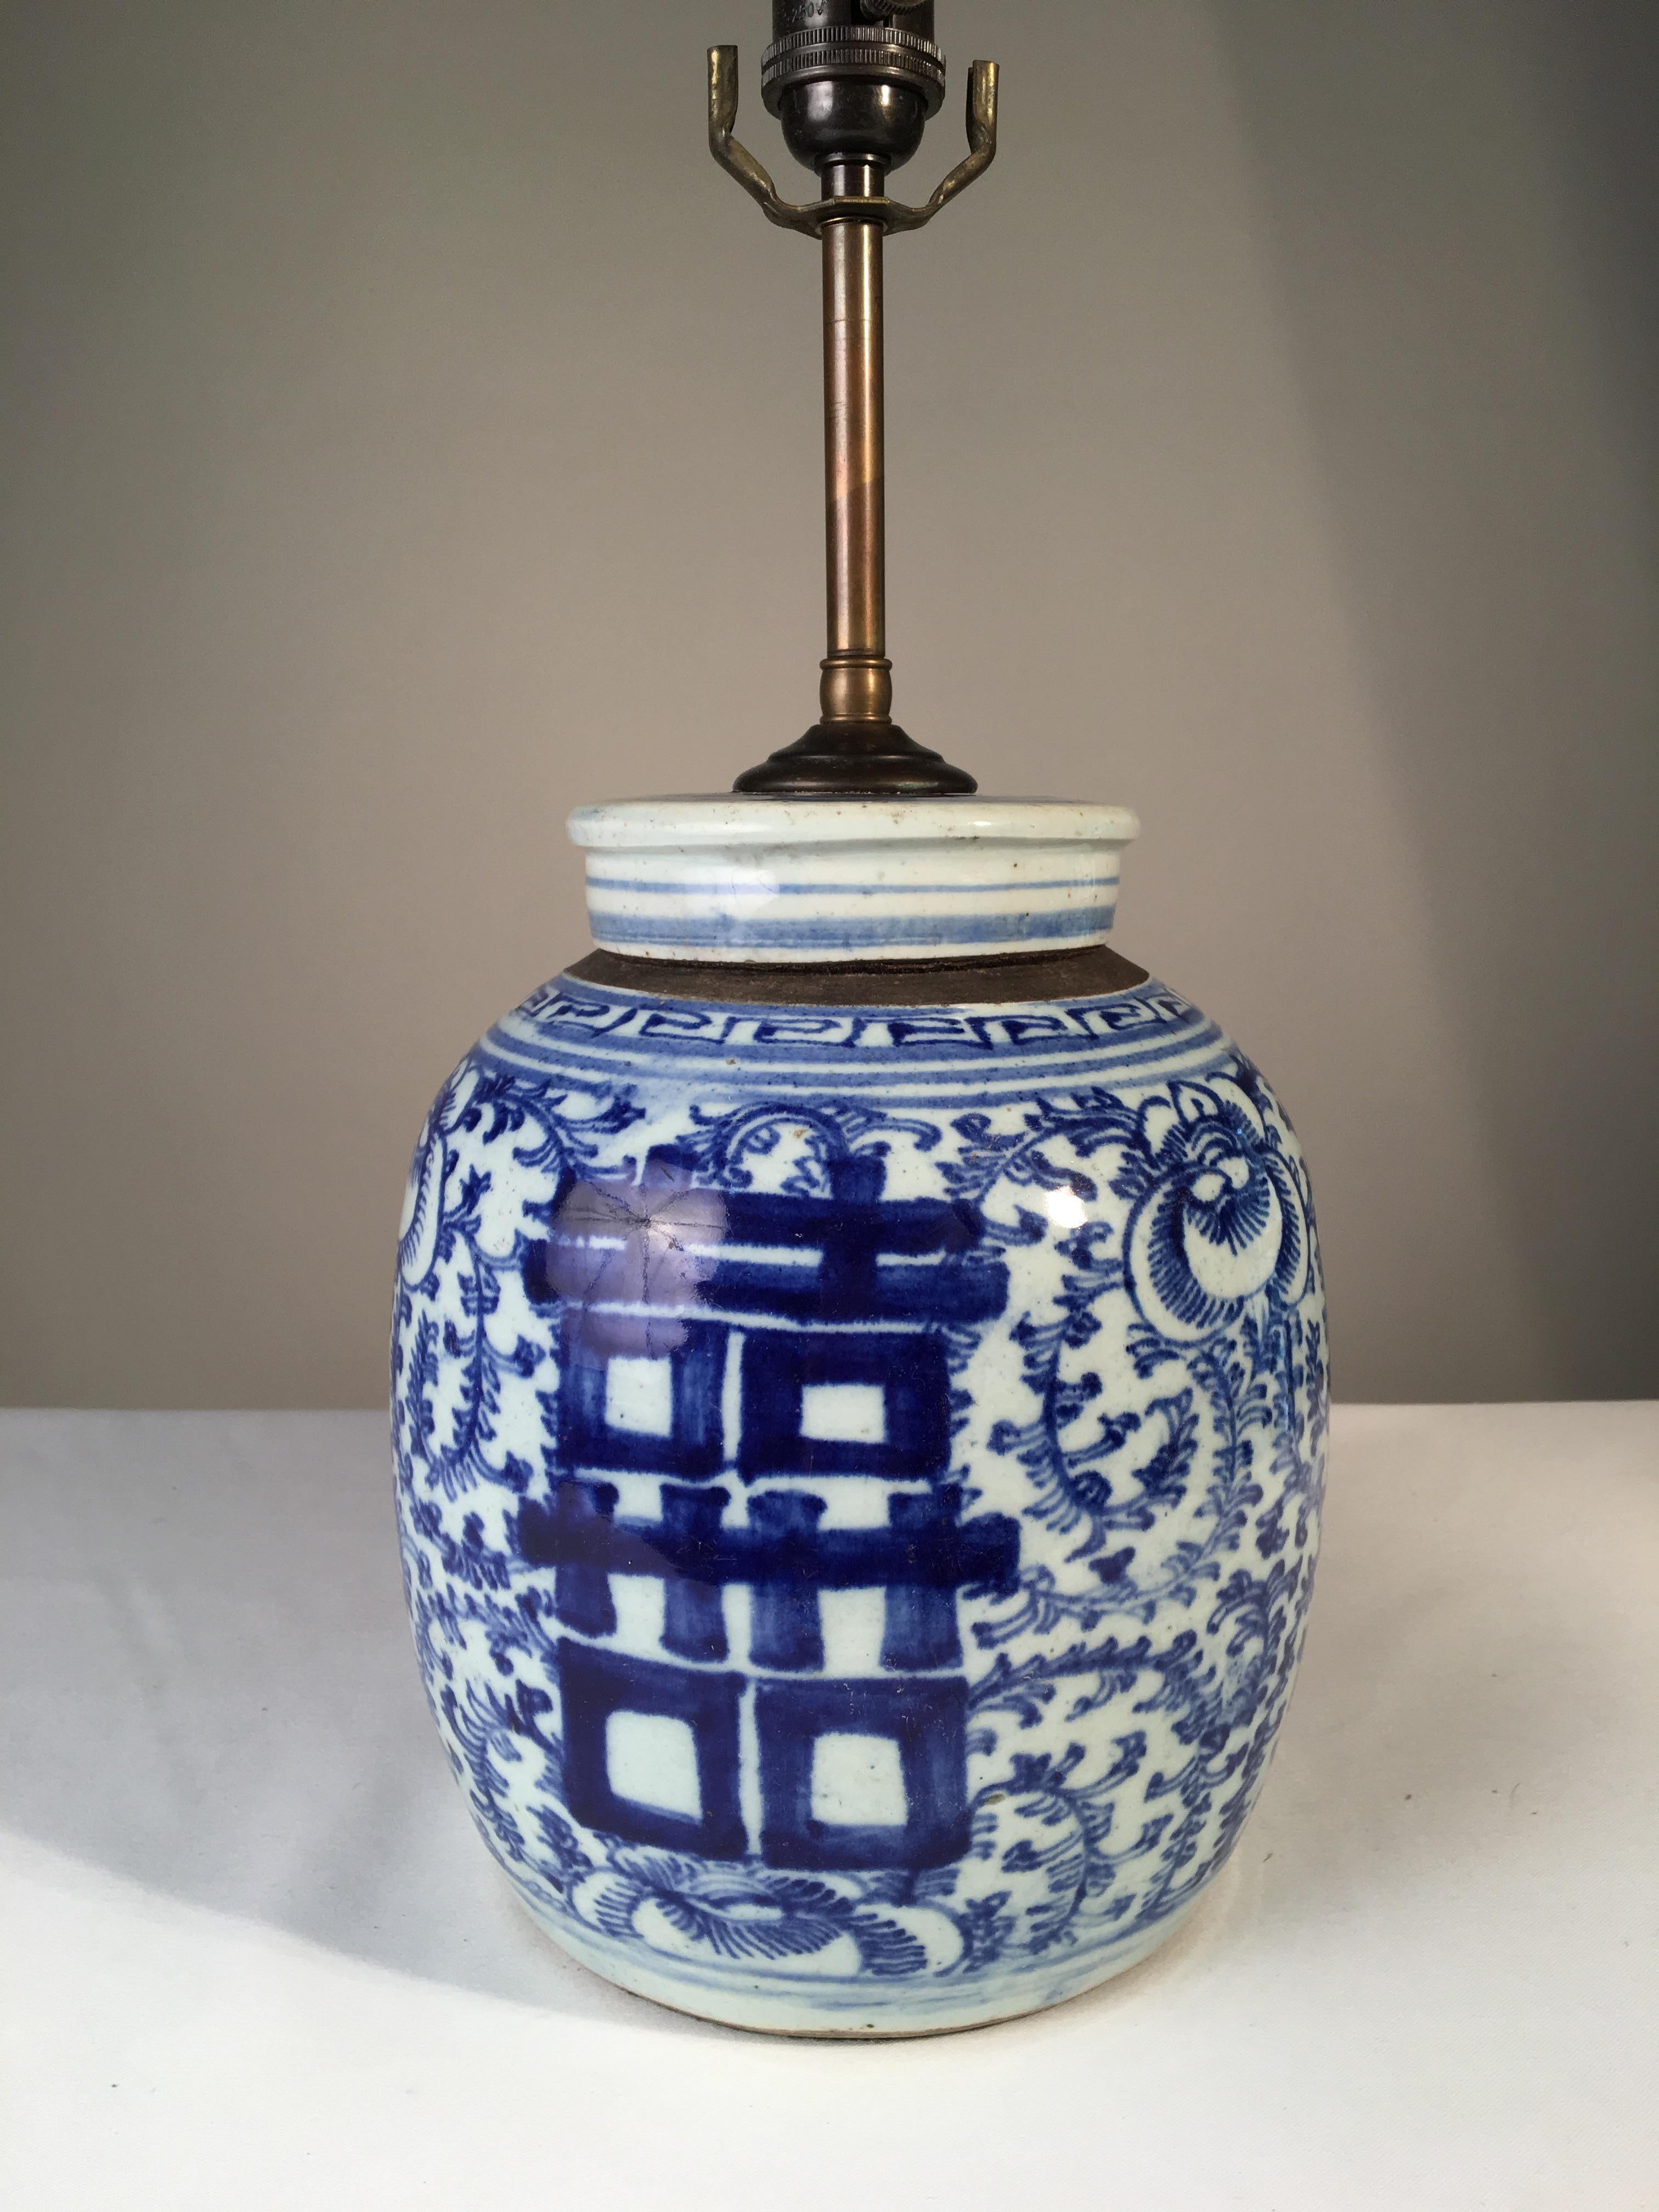 A Chinese blue and white glazed ceramic ginger jar with lid mounted as a lamp. Rewired.